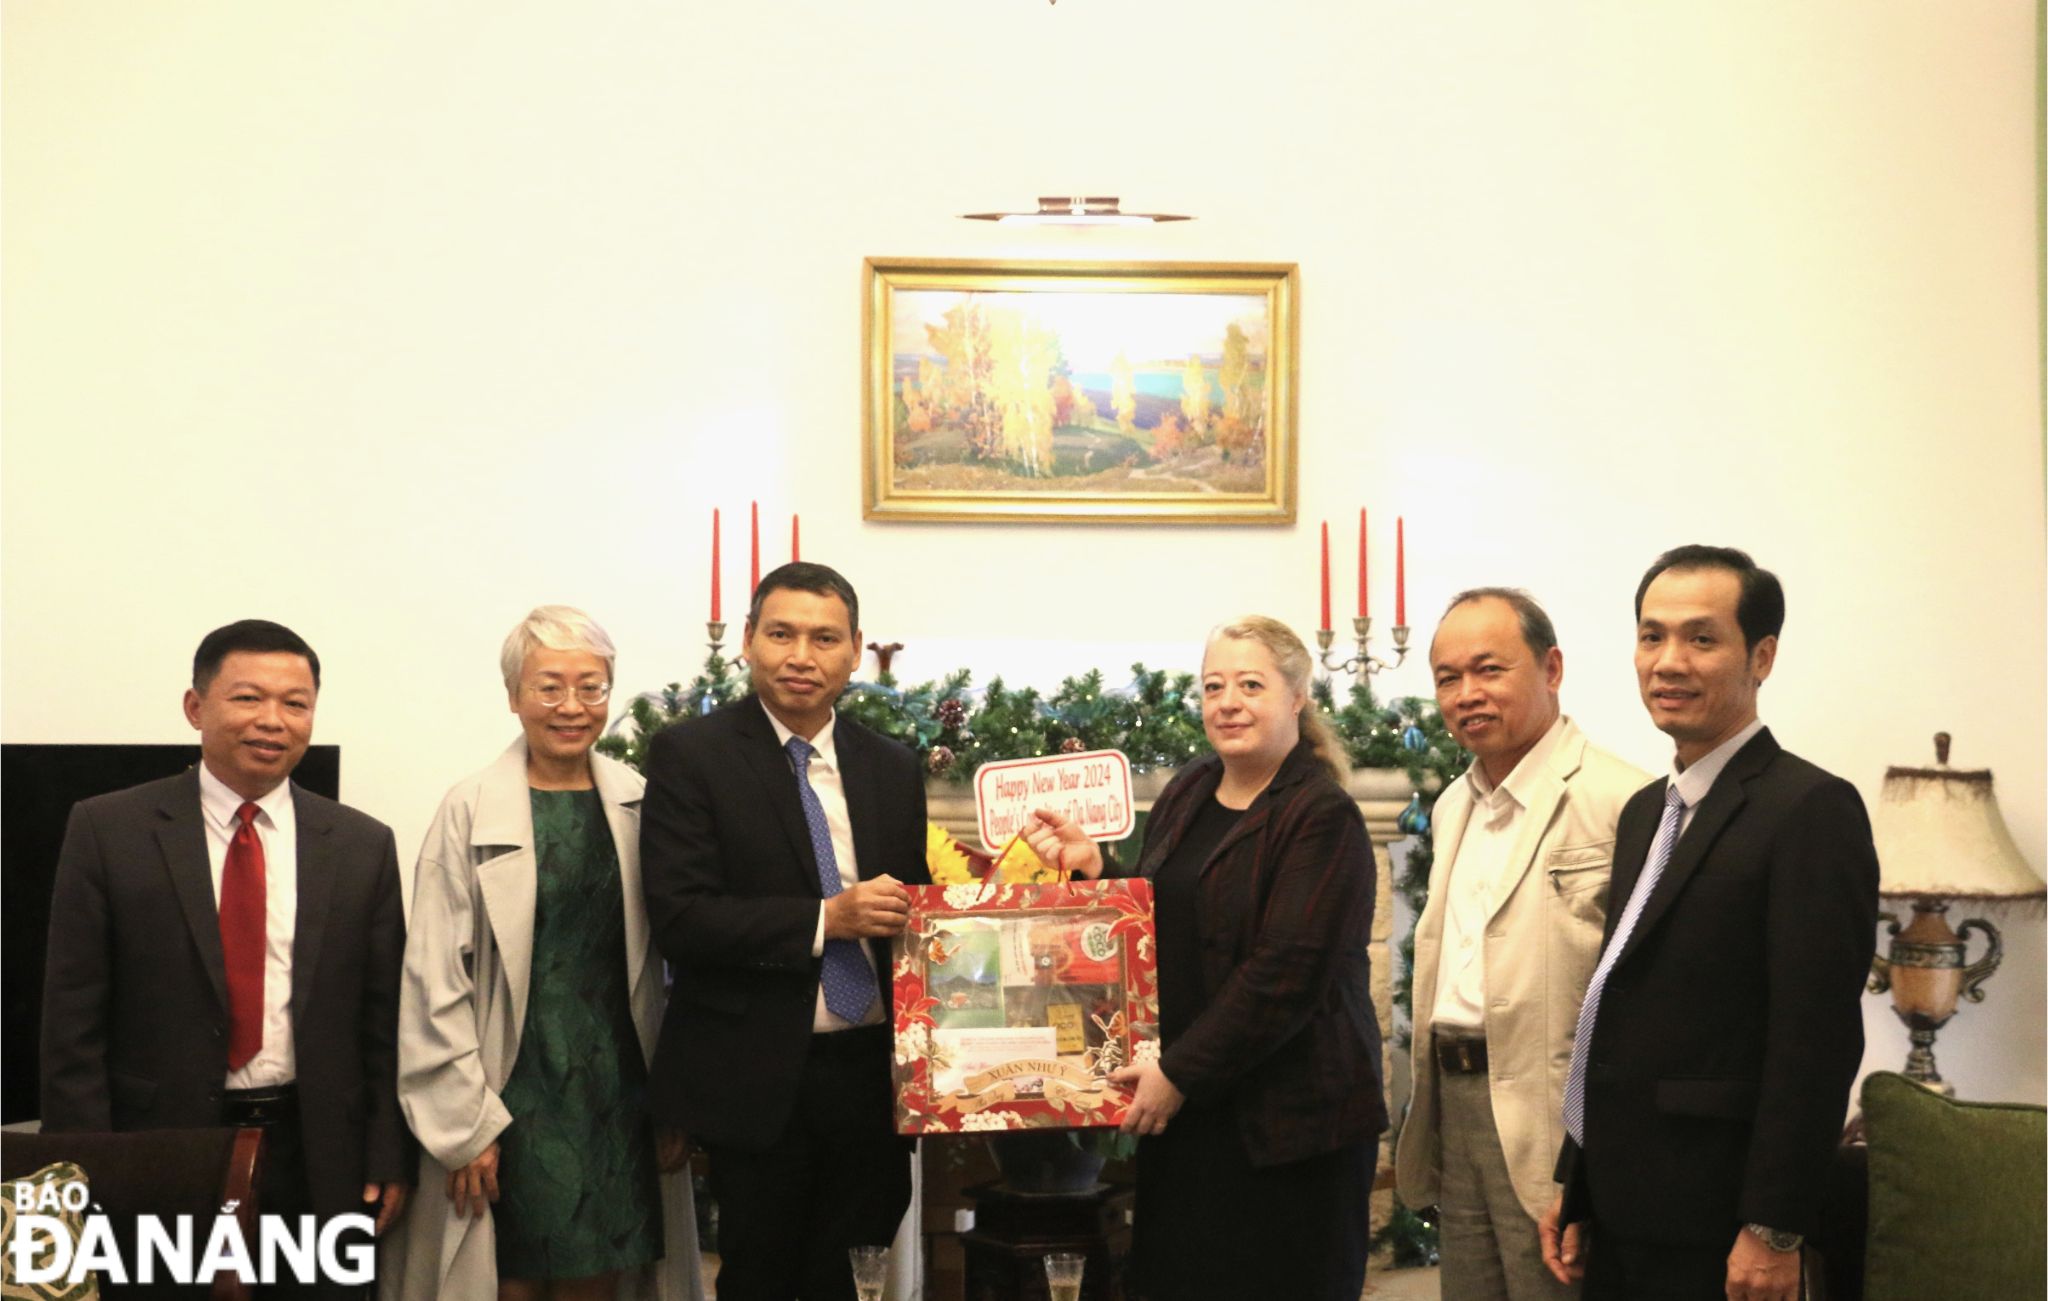 Vice Chairman of the Da Nang People's Committee Ho Ky Minh (3rd, from left) presenting a New Year's gift to Mrs. Mizonova Maria Georgievna, the Russian Consul General in Da Nang (3rd, from right). Photo: T.PHUONG